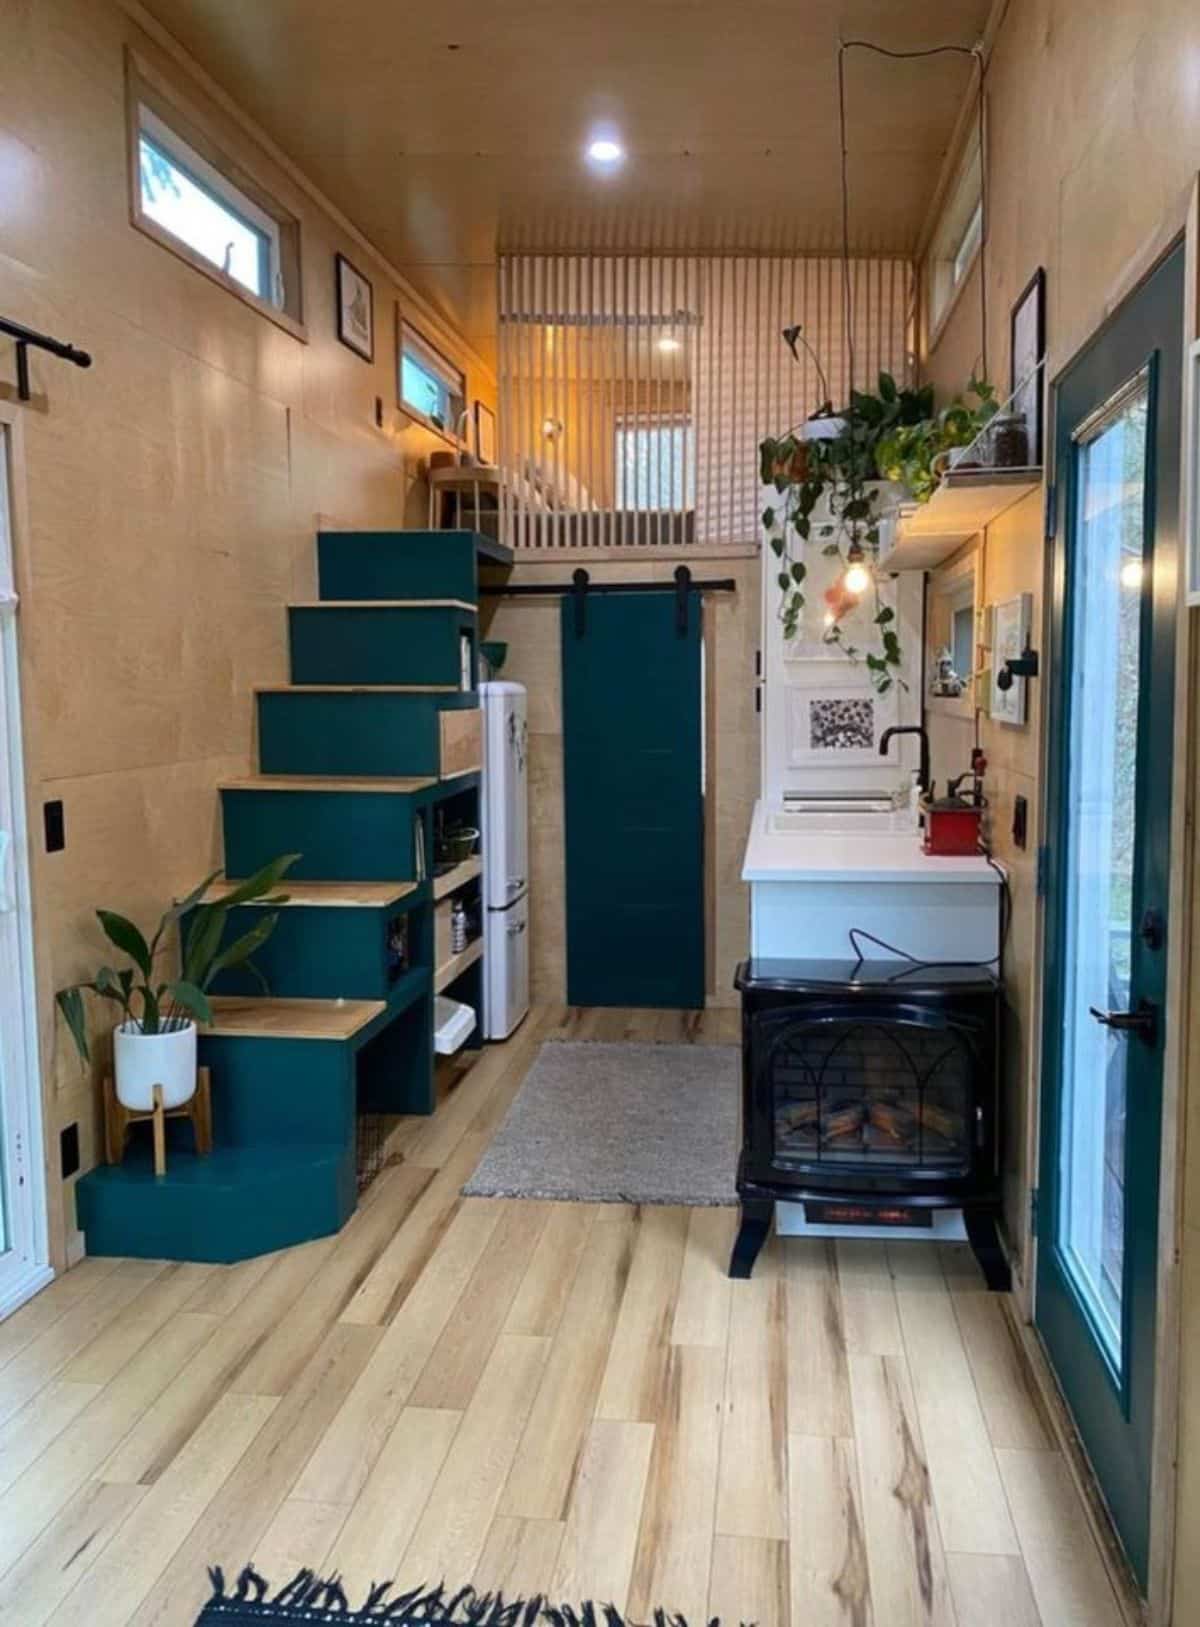 multi purpose stairs leading to the loft bedroom has an oven, a refrigerator underneath